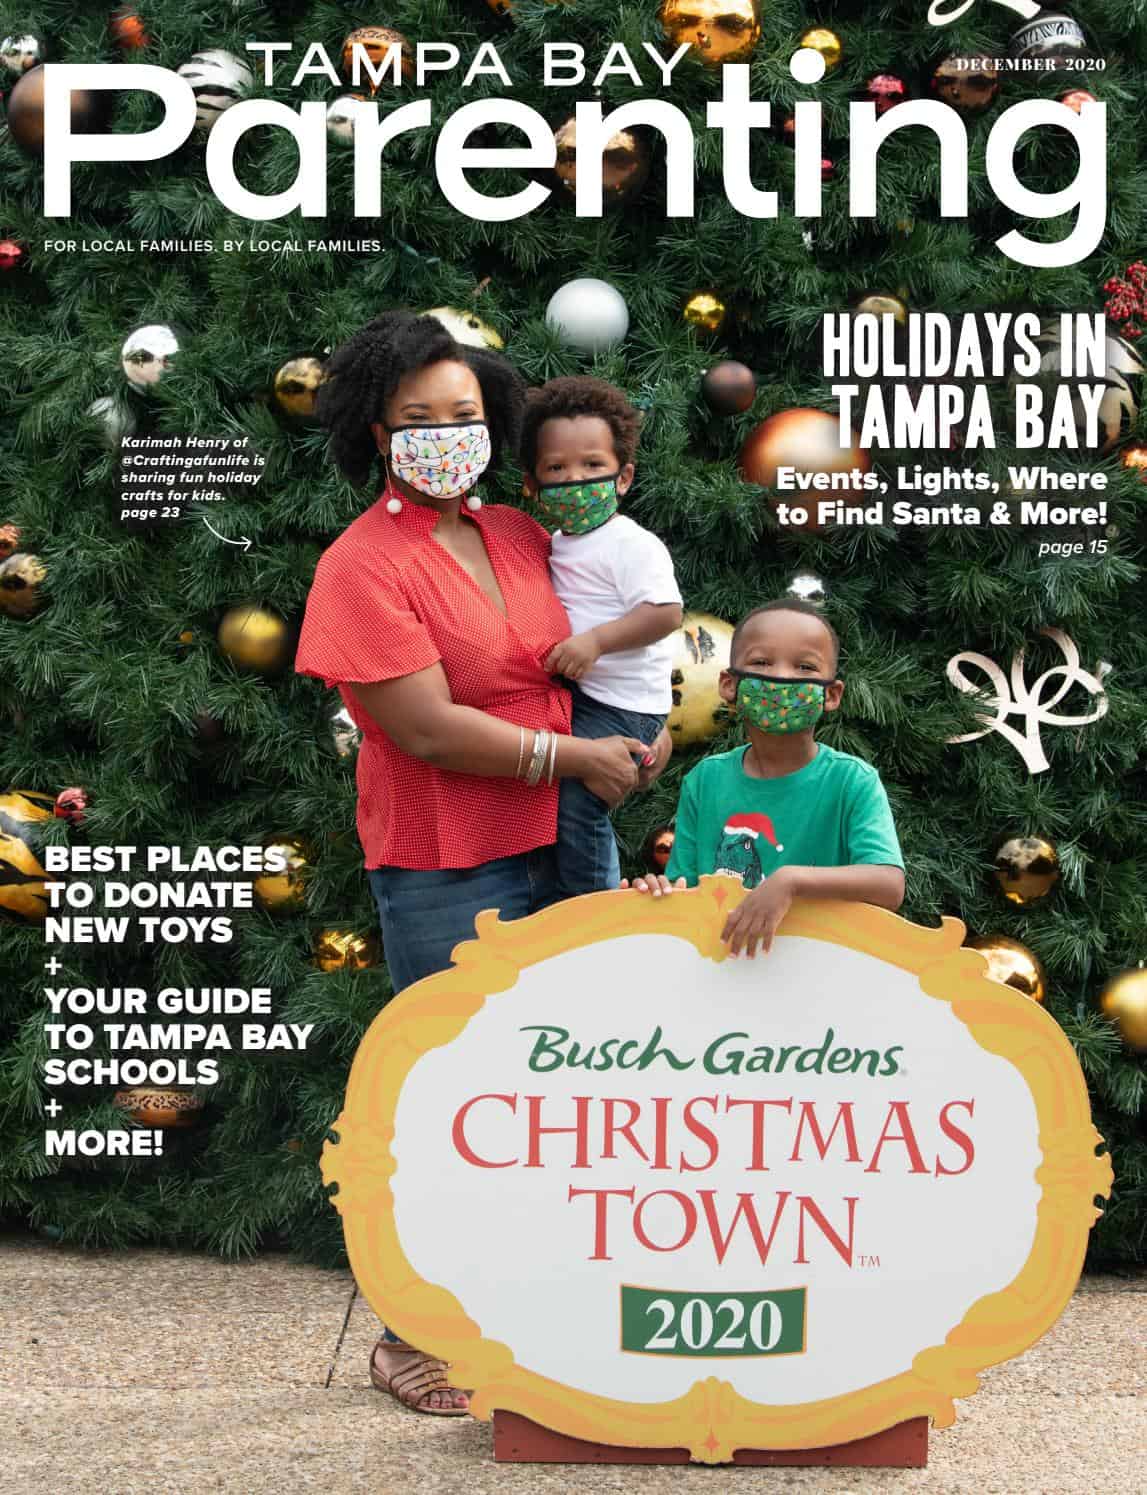 December 2020 Issue of Tampa Bay Parenting Magazine